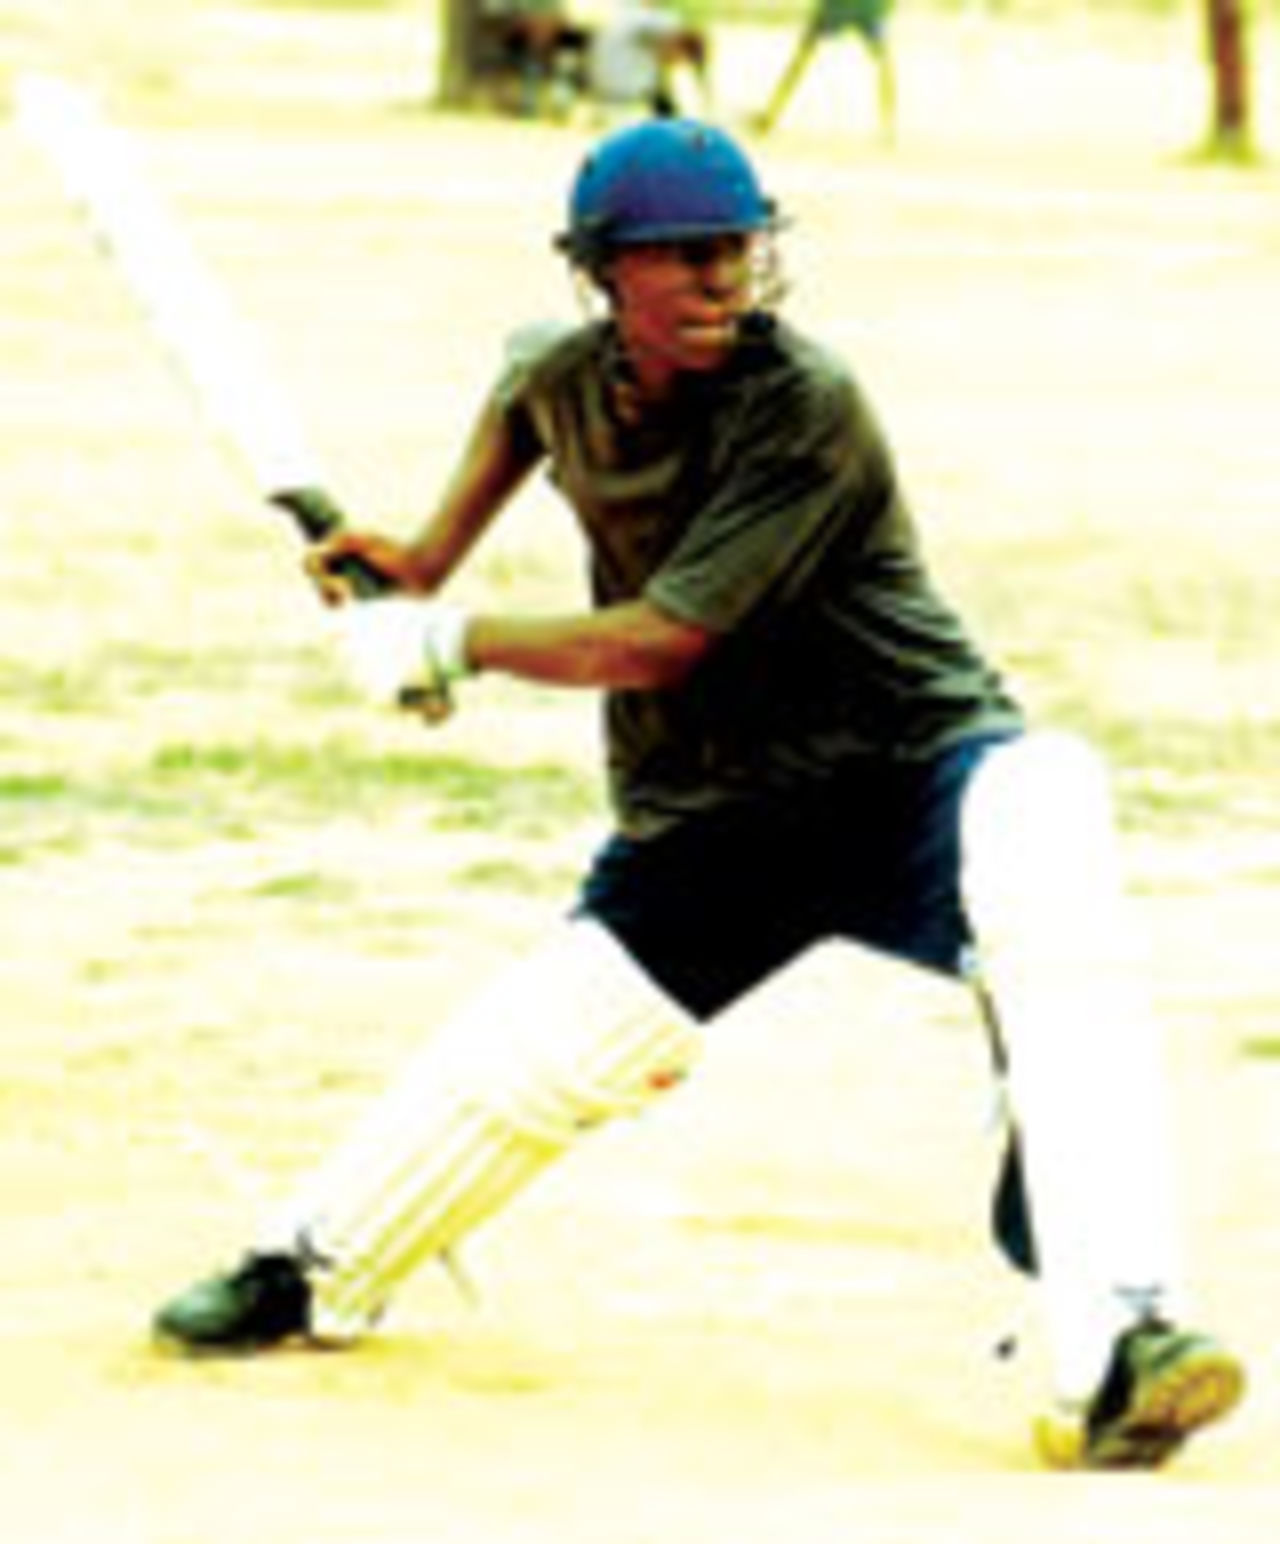 A young Zimbabwean cricketer shapes for a cover drive, July 15 2004